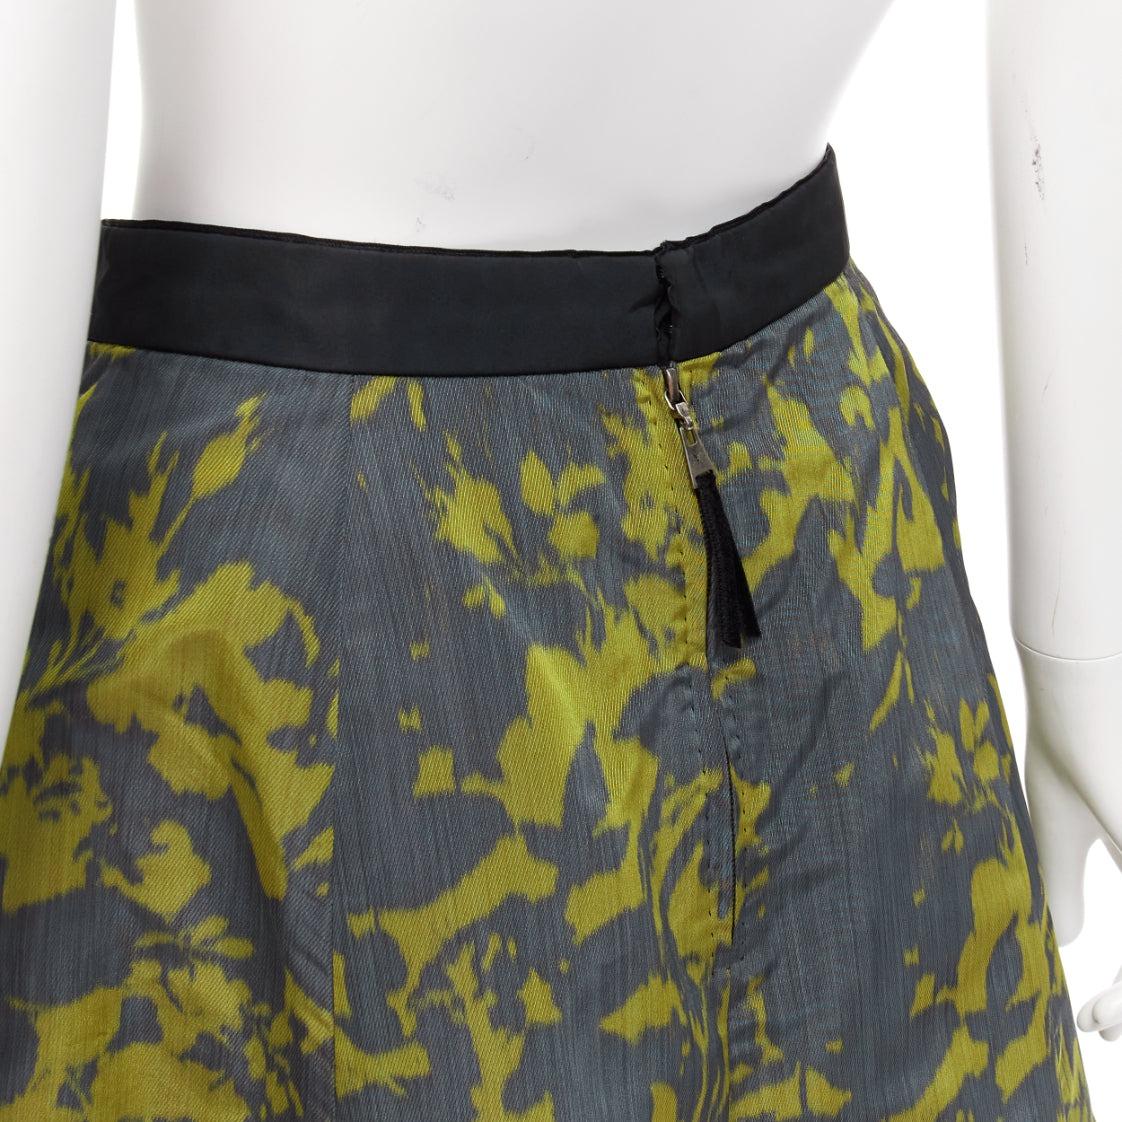 LOUIS VUITTON green floral jacquard velvet trim LV zip flared skirt
Reference: NKLL/A00045
Brand: Louis Vuitton
Material: Fabric
Color: Green, Yellow
Pattern: Abstract
Closure: Zip
Lining: Black Fabric
Extra Details: Back zip.

CONDITION:
Condition: